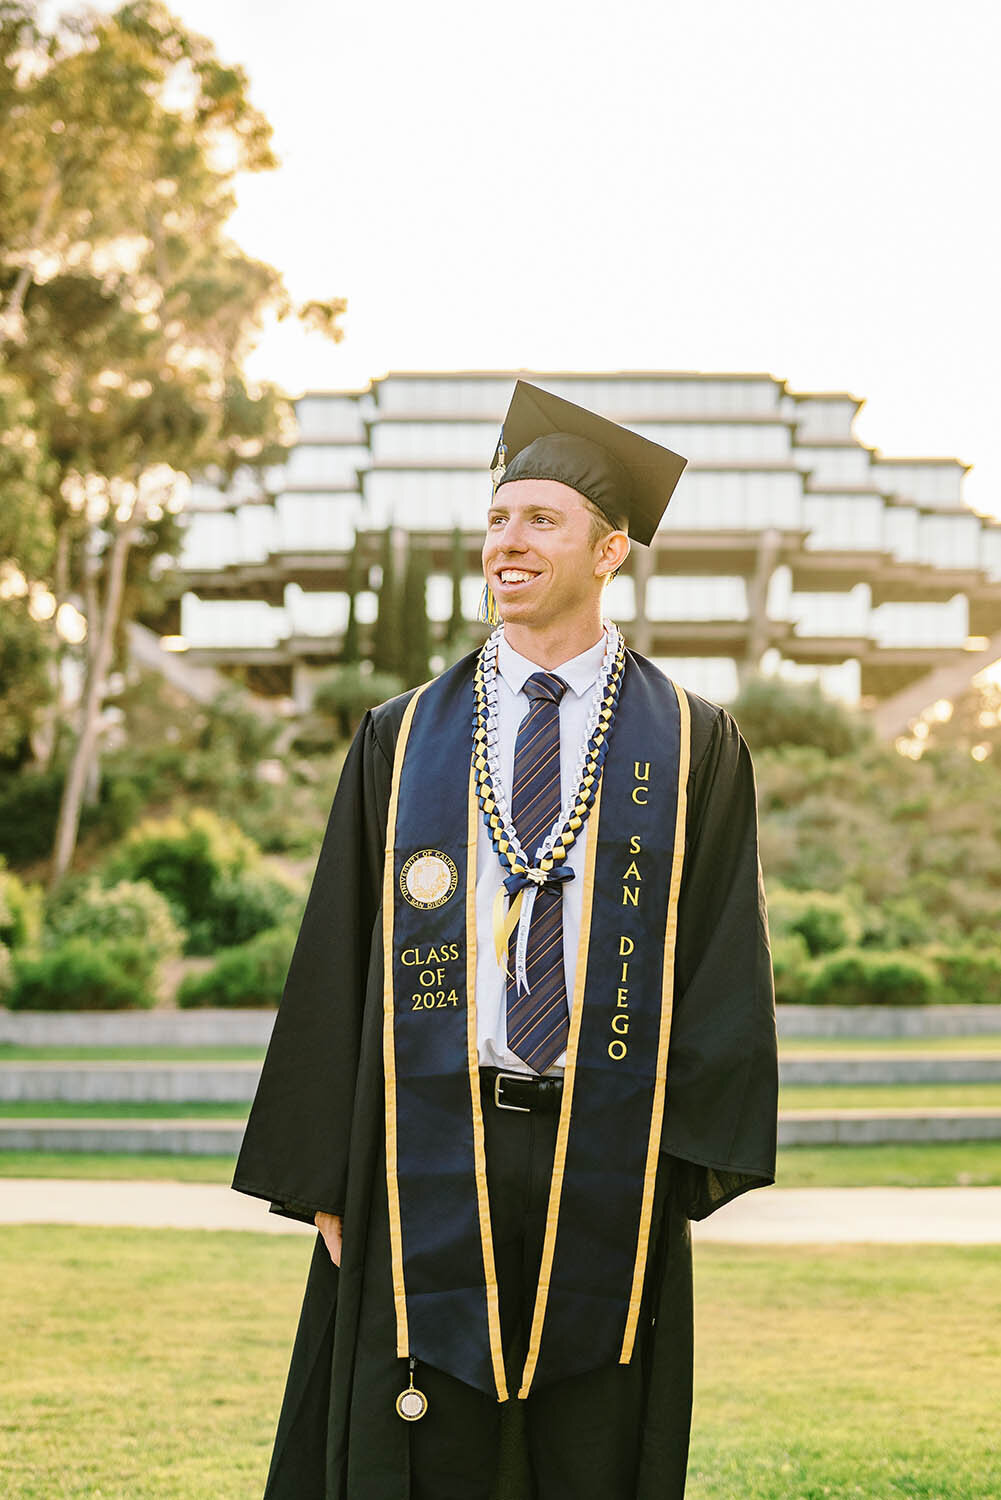 Cap and gown photos at the University of California San Diego